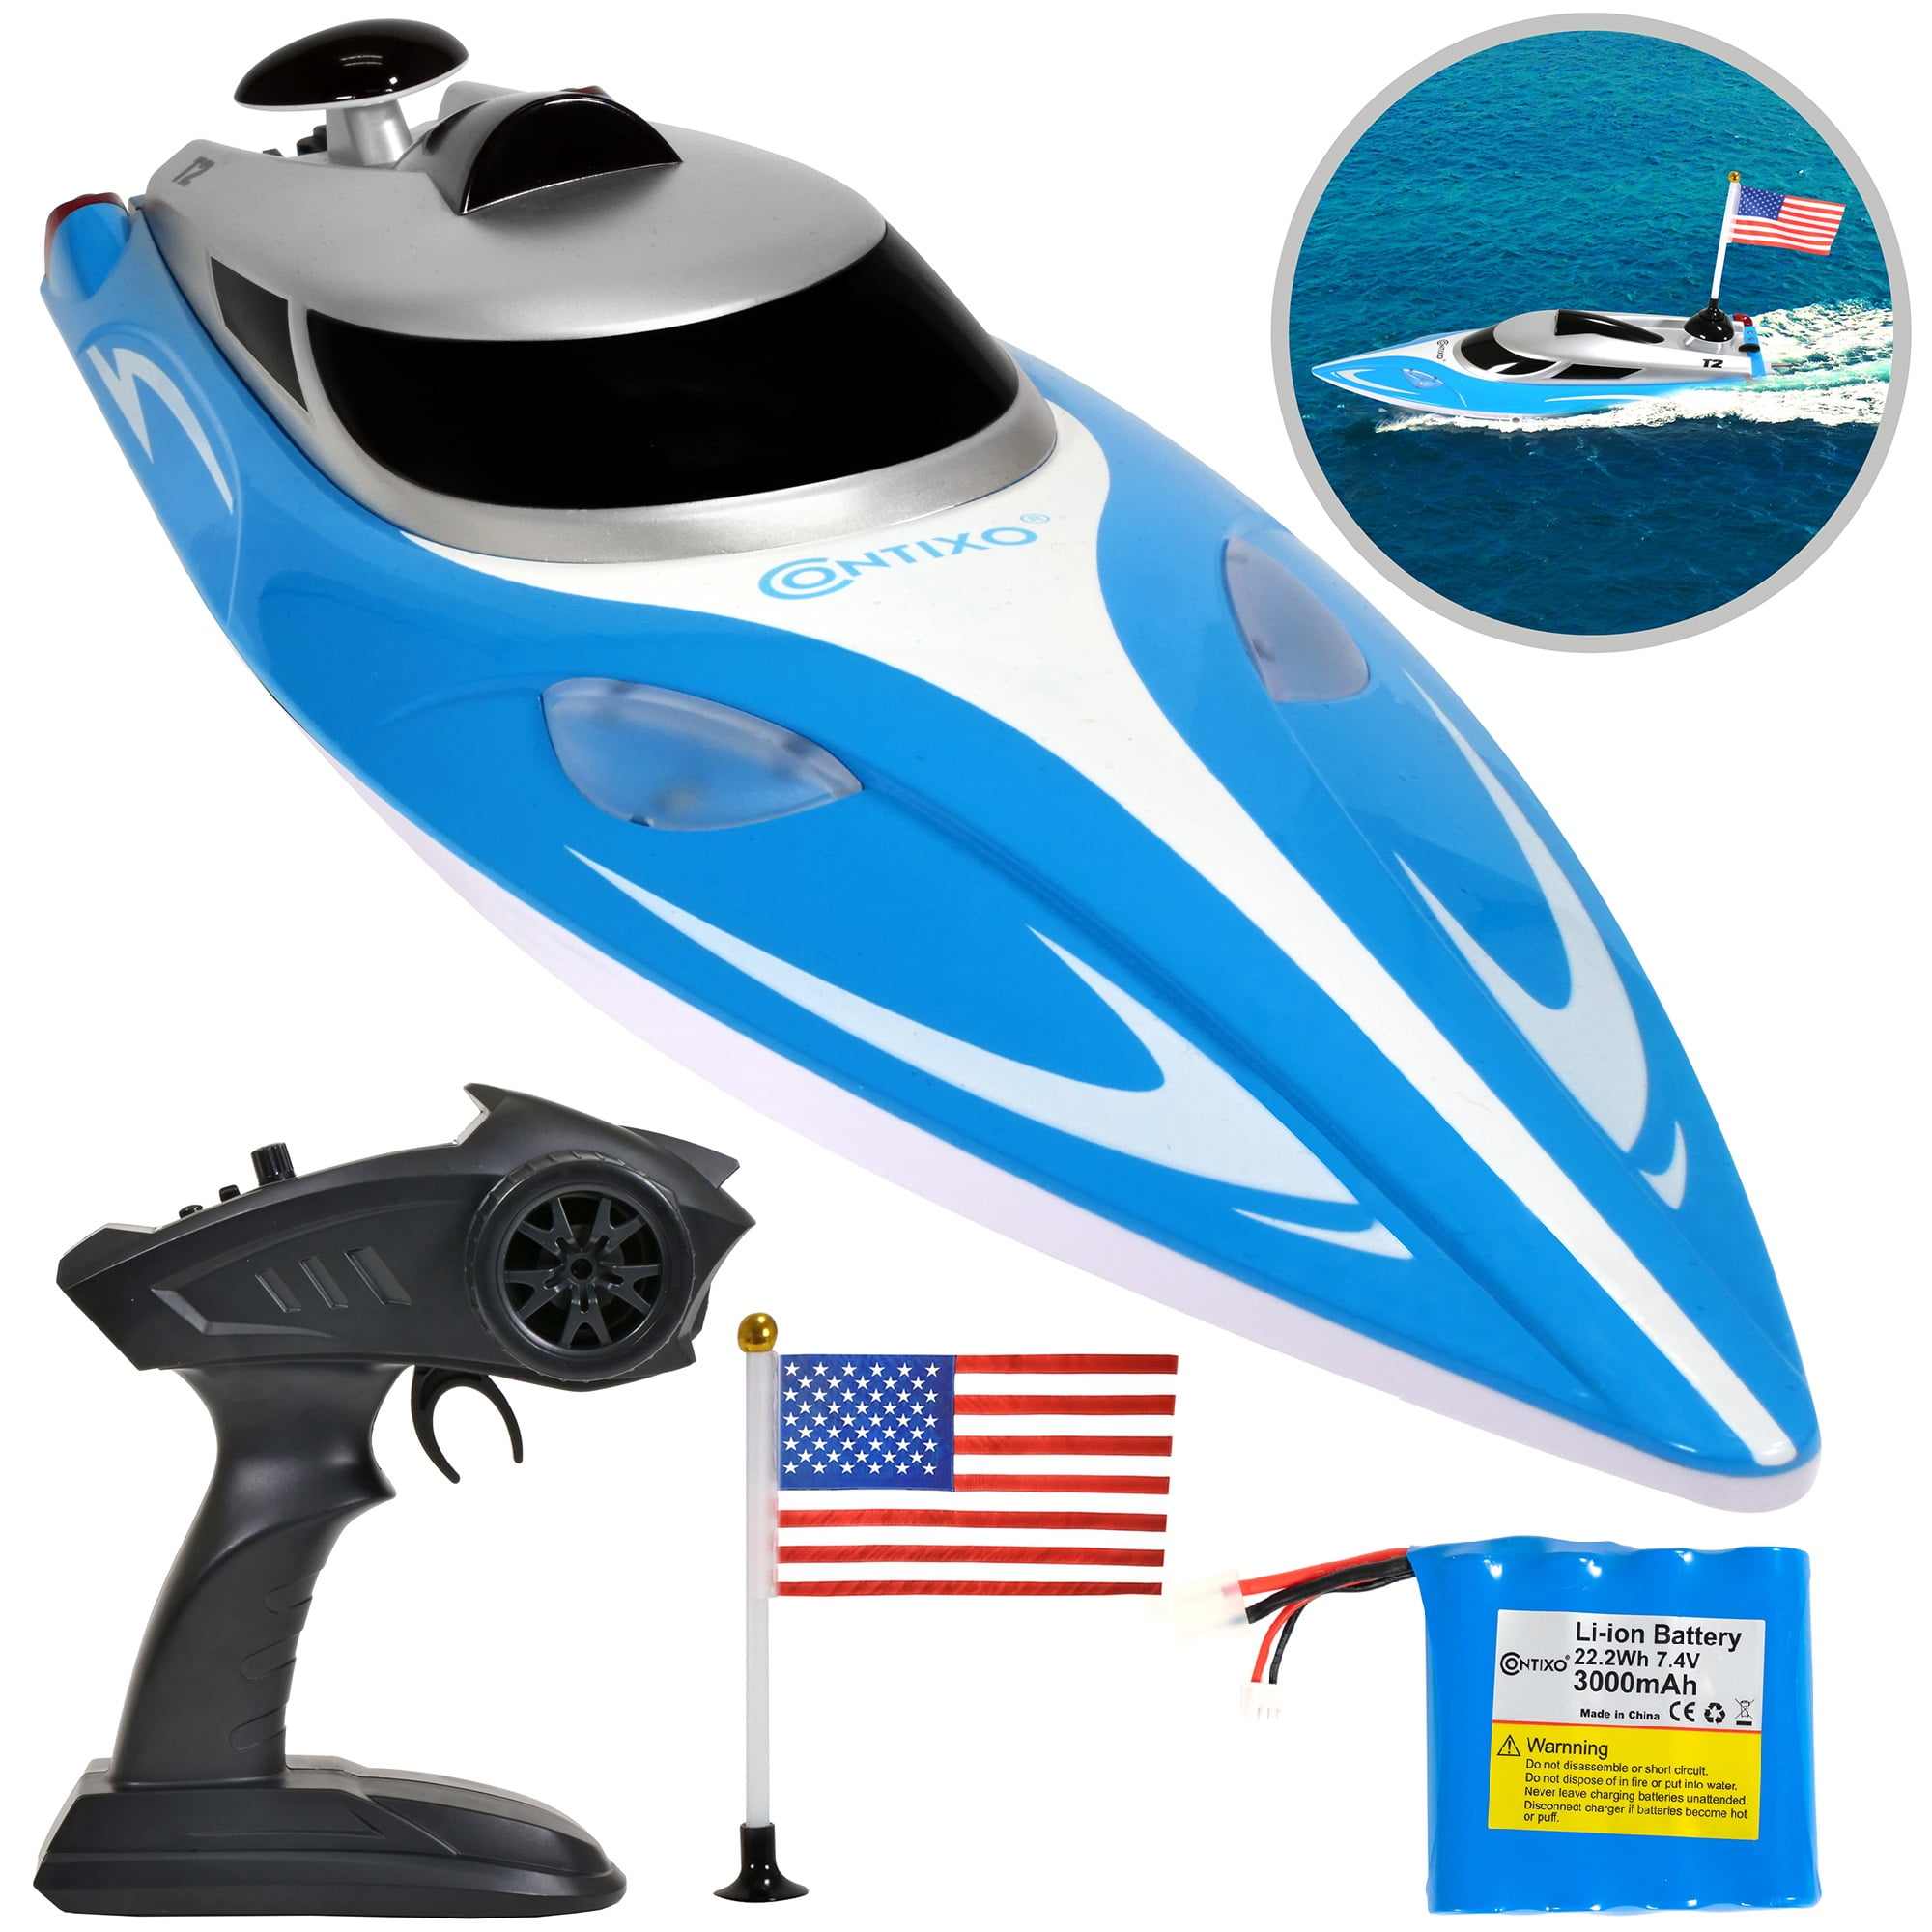 Tbest Remote Control Toy Boat,25km/h High Speed Remote Control Boats 4 Channel 2.4GHz Racing Speedboat Model Toy Ship for Pools and Lakes Christmas Birthday Gift for Boys Girls Kids